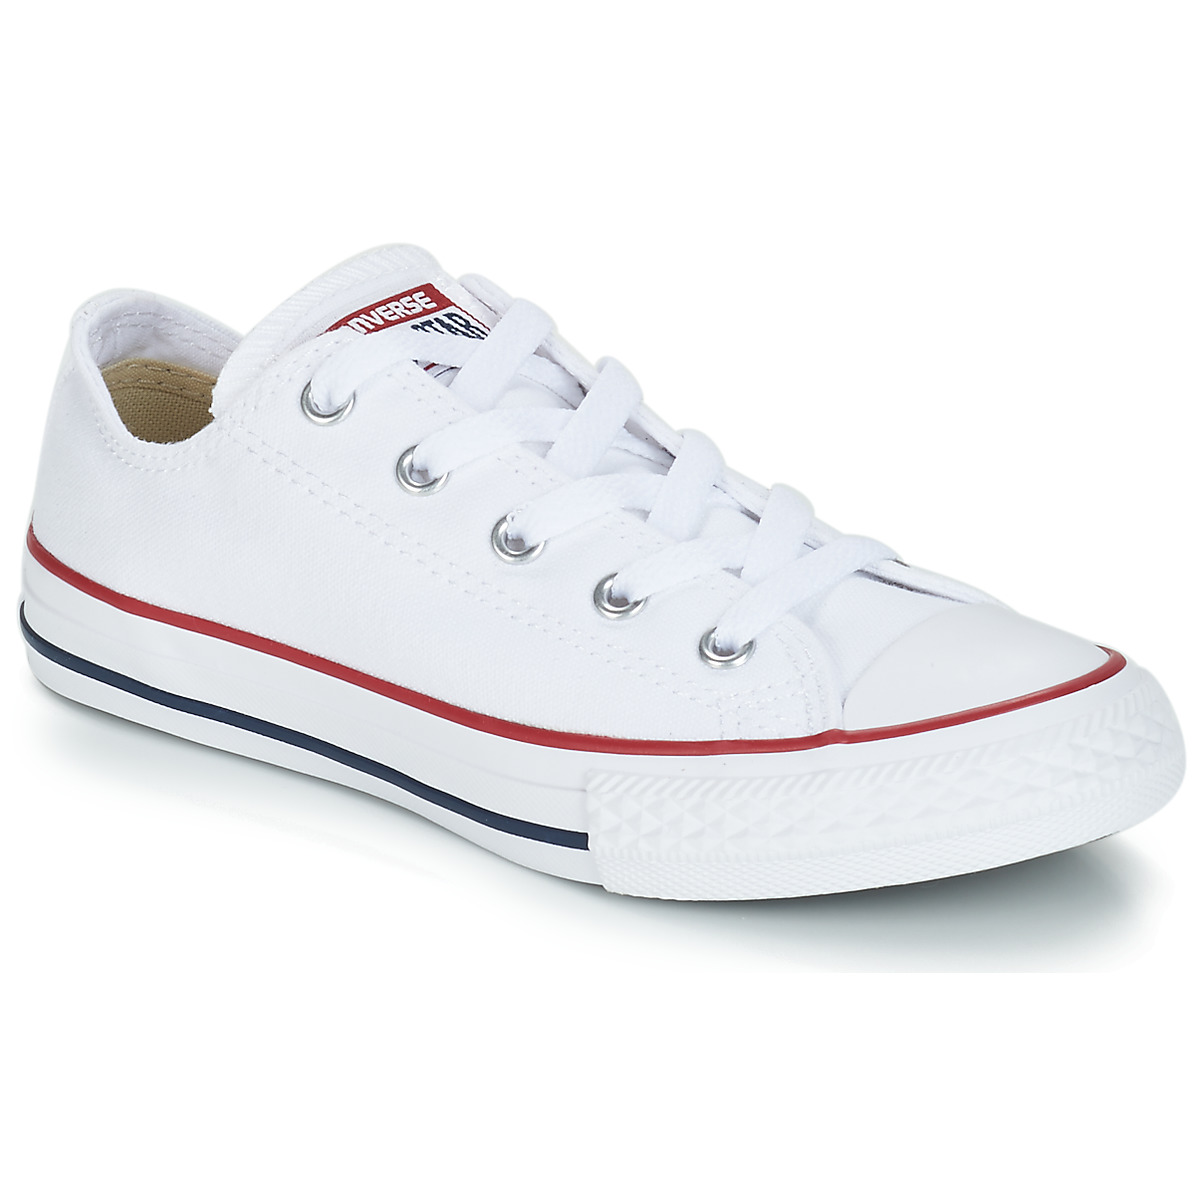 converses basses blanches pas cher